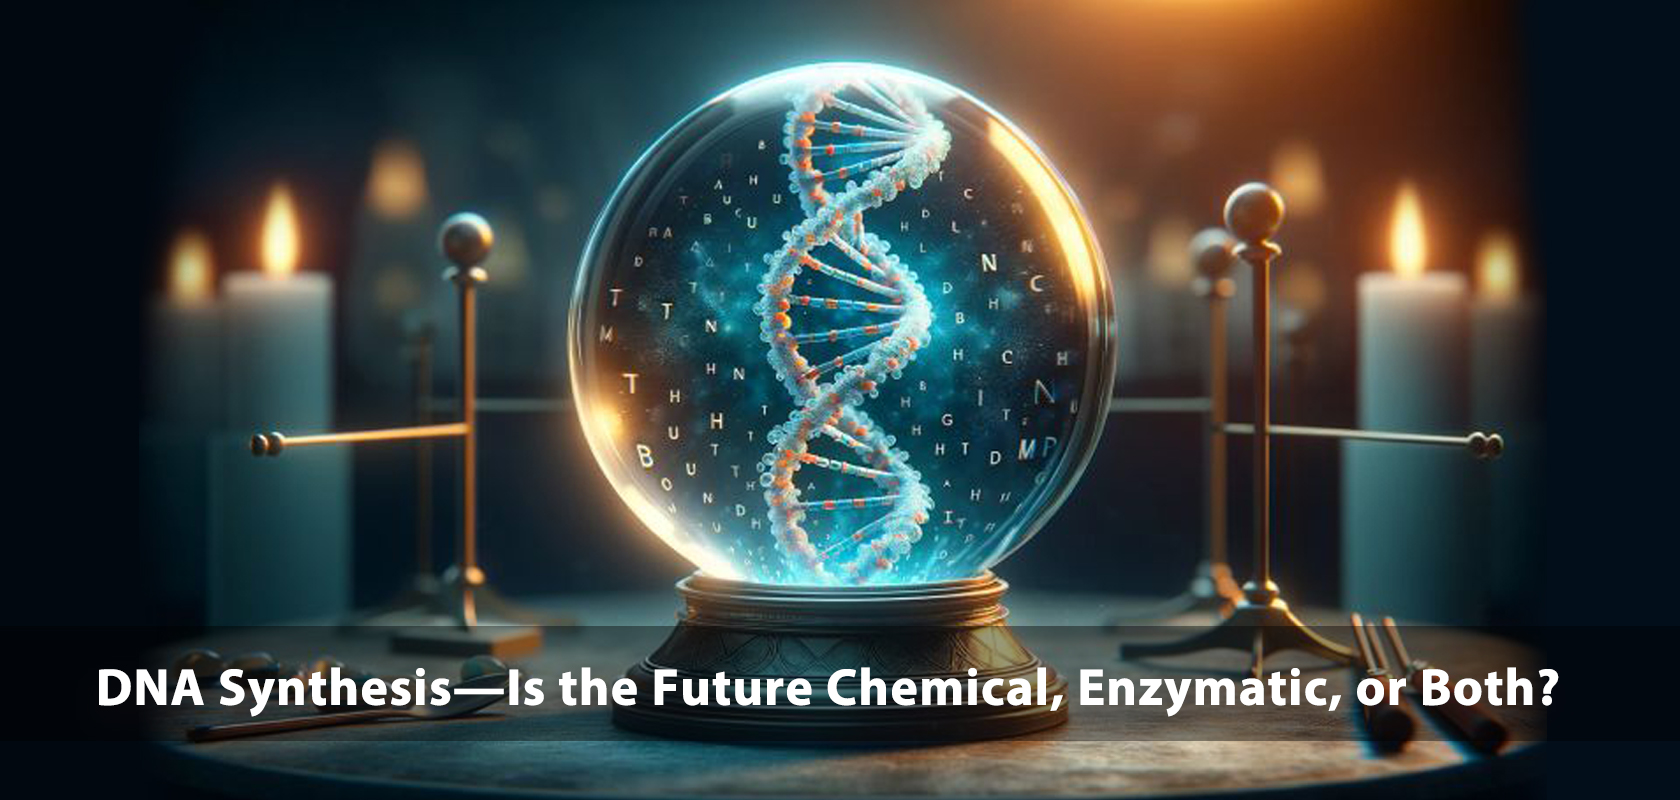 DNA Synthesis—Is the Future Chemical, Enzymatic, or Both?